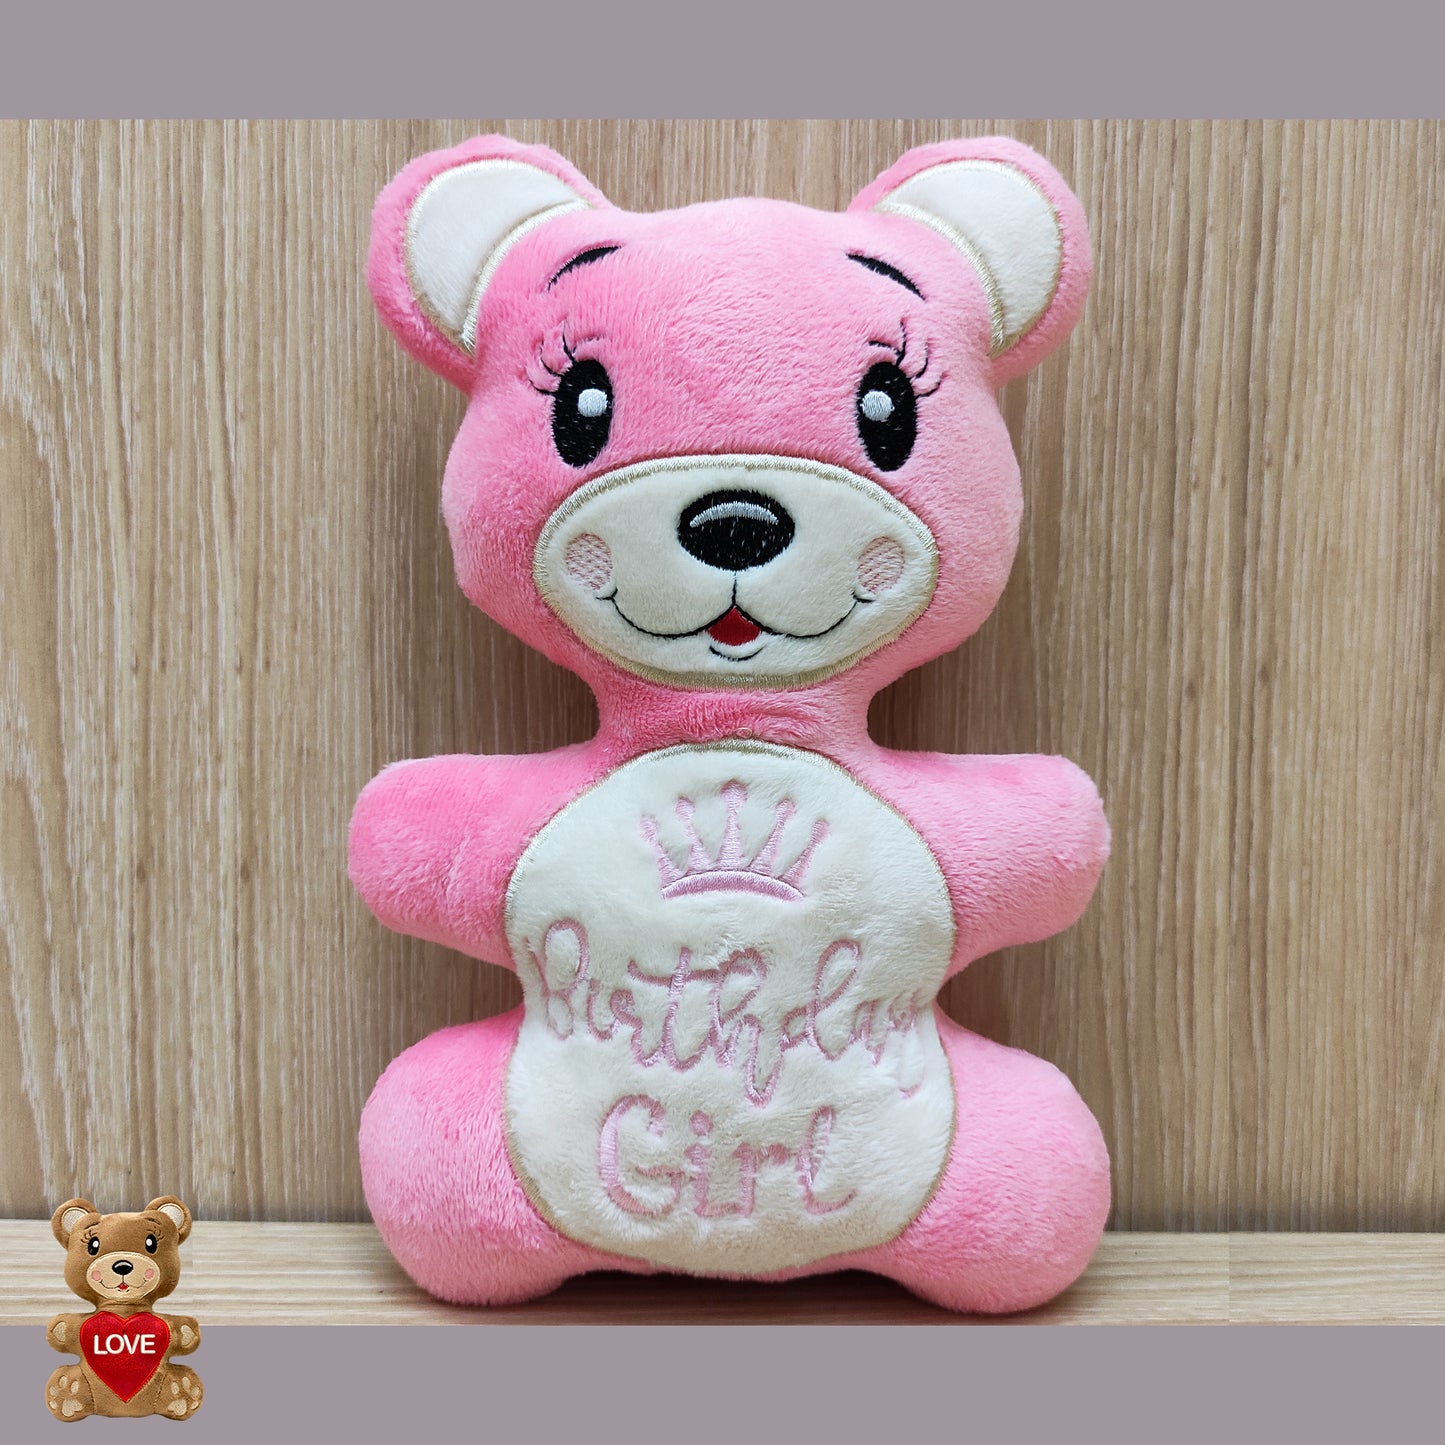 Personalised BearTeddy Happy Birthday Stuffed Toy ,Super cute personalised soft plush toy, Personalised Gift, Unique Personalized Birthday Gifts , Custom Gifts For Children